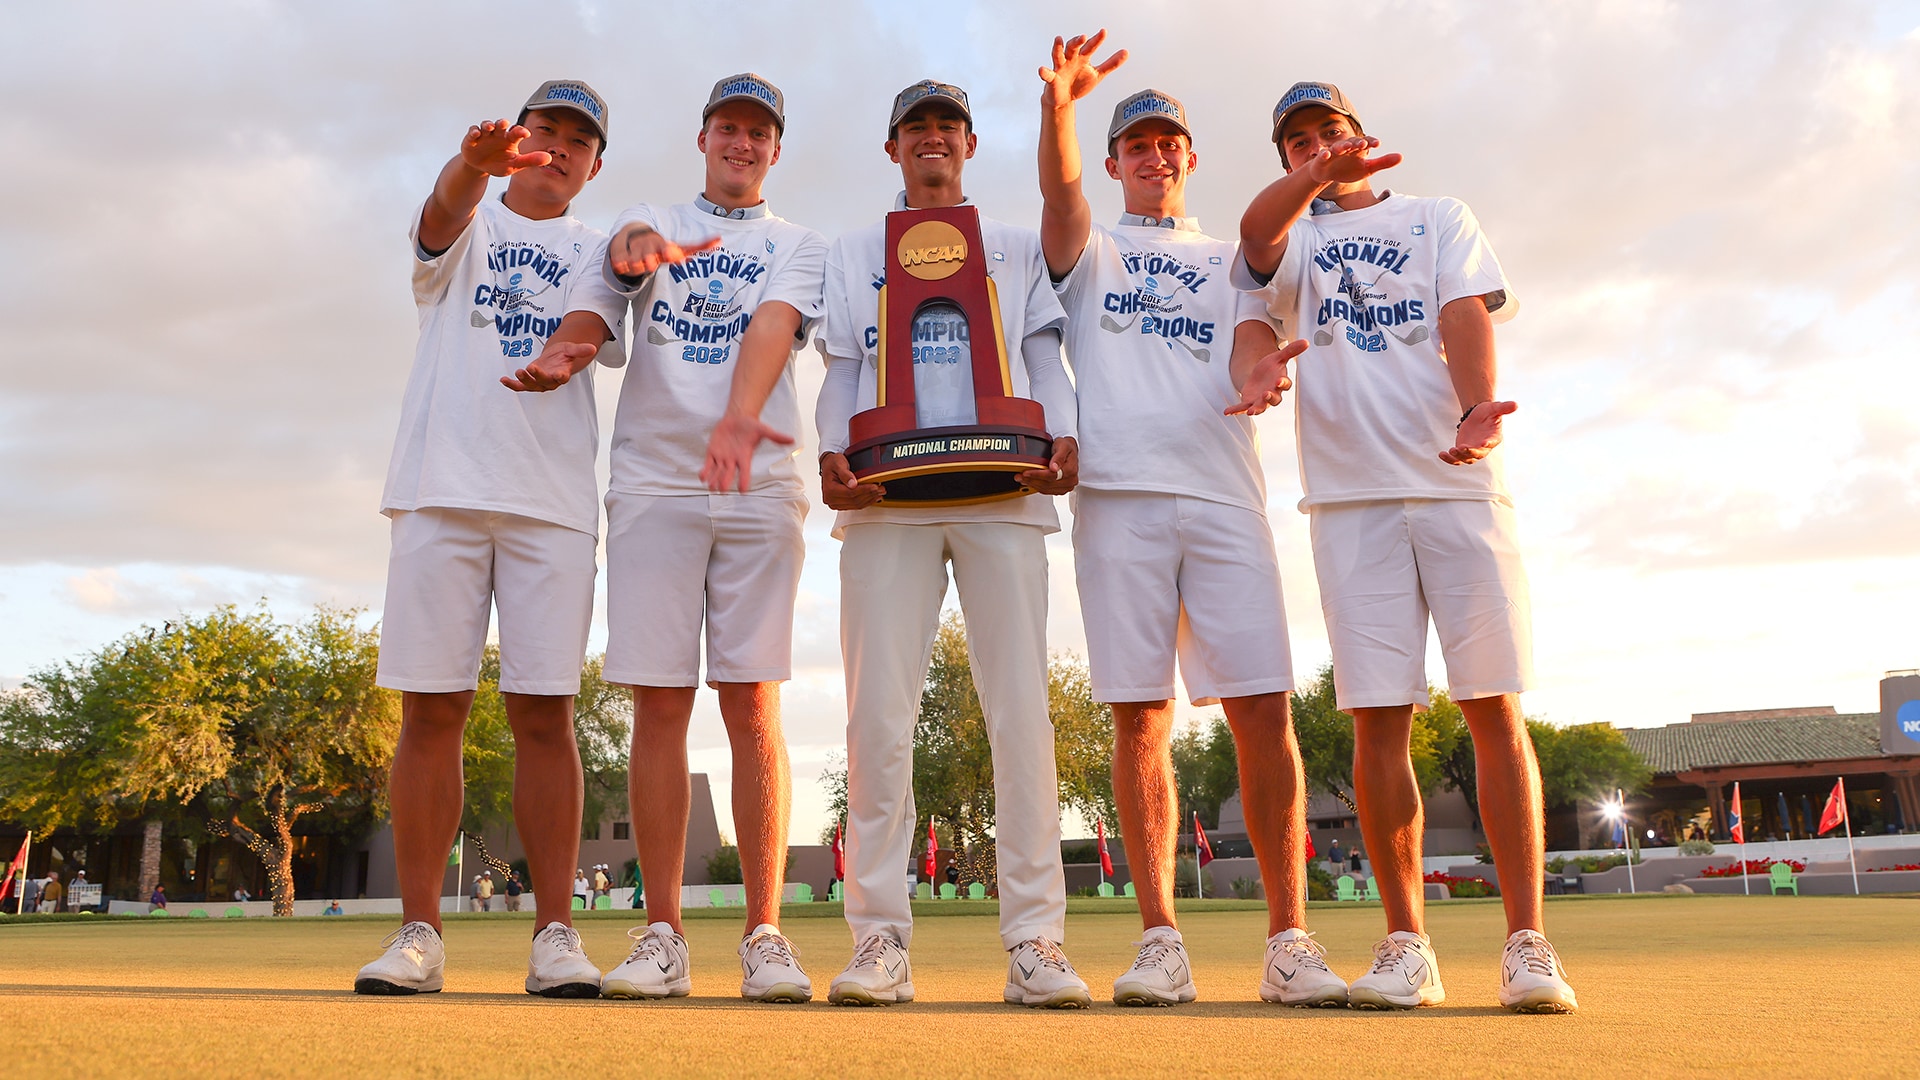 Four years of growth lead to NCAA title for Fred Biondi and Florida Gators